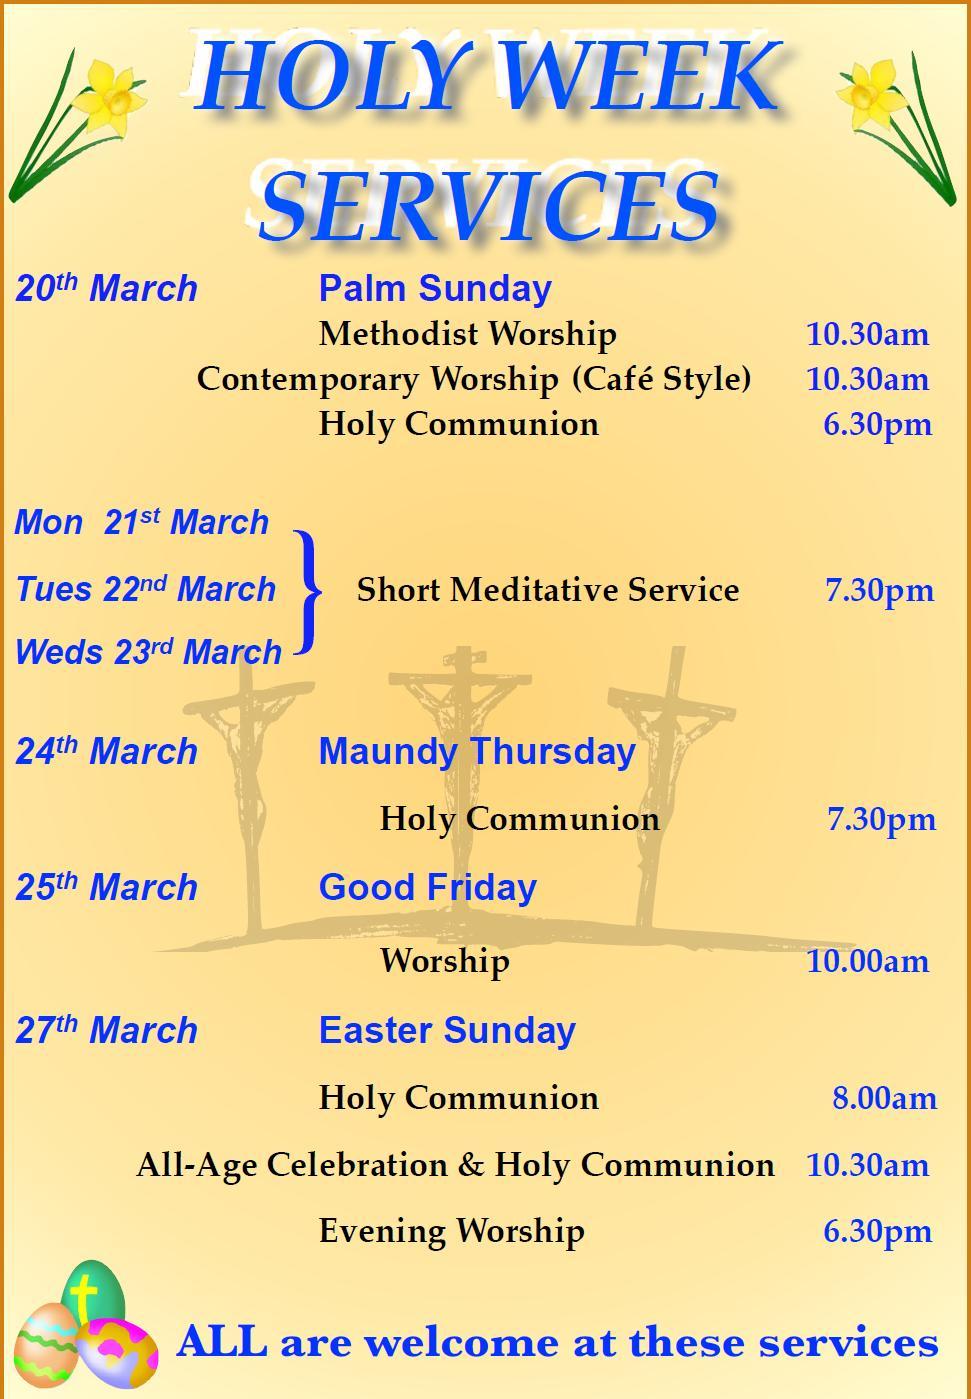 Lenten Cross Liturgy Our liturgy this year comes from Nexus Methodist Church, a Christian Community in Bath where 2 Methodist churches have united, using one building as their main worship centre and